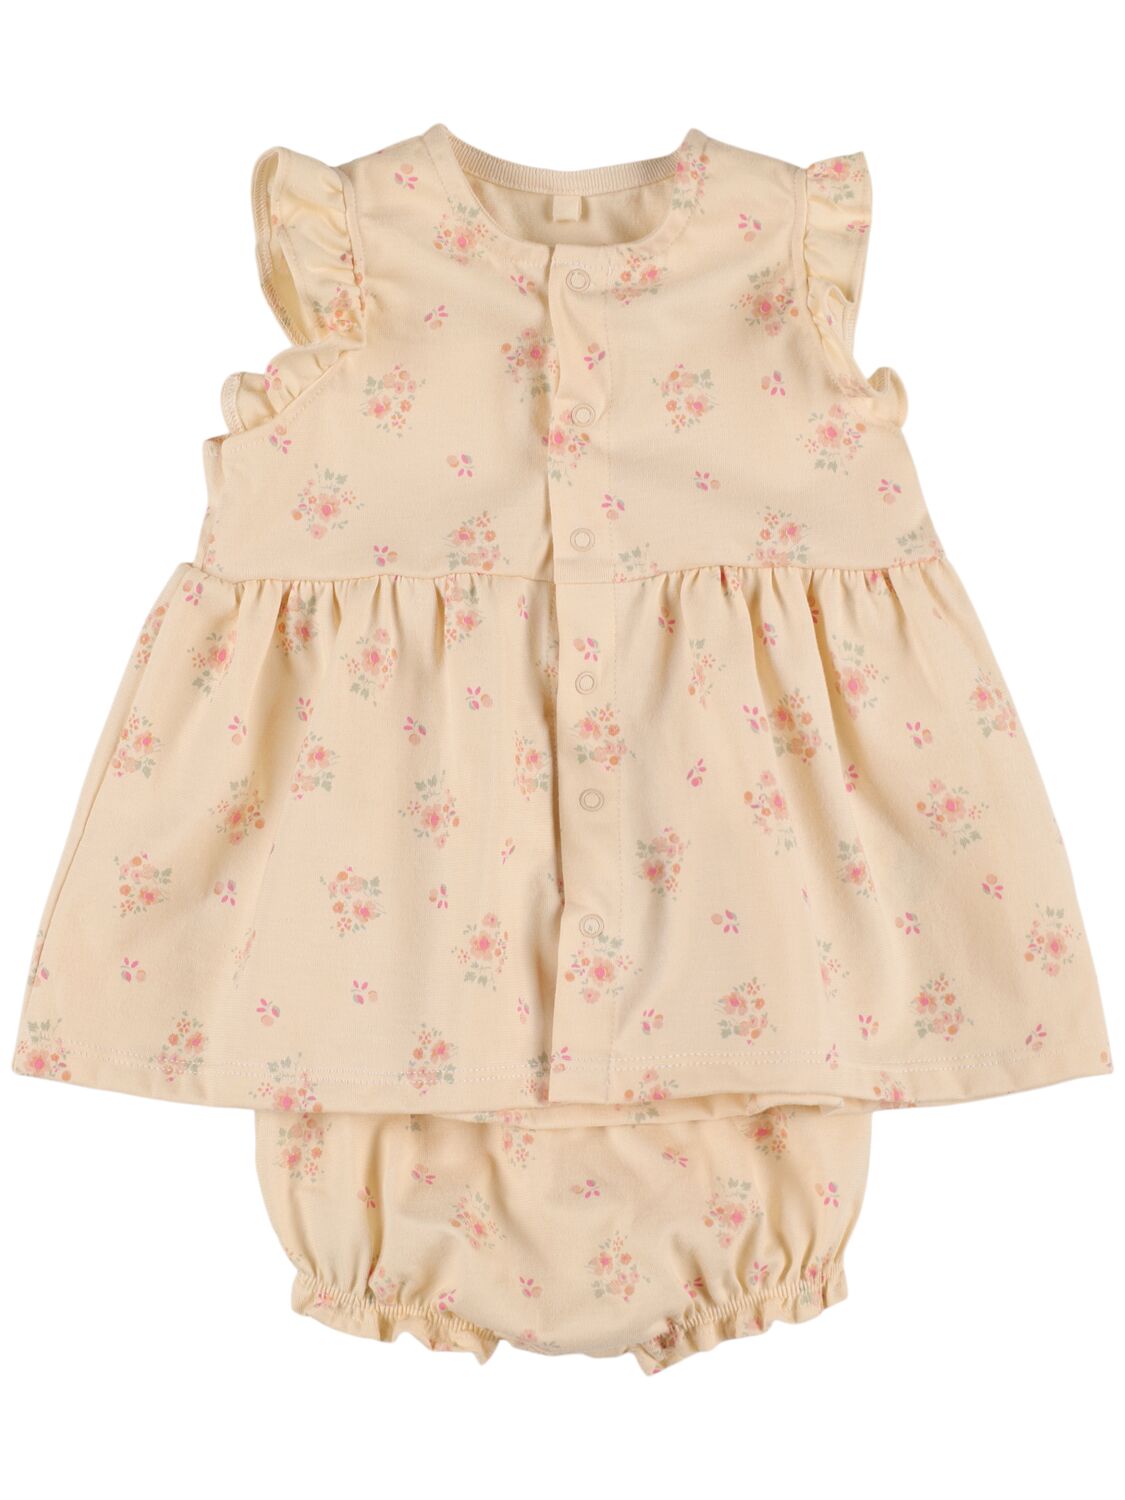 Image of Cotton Dress & Diaper Cover